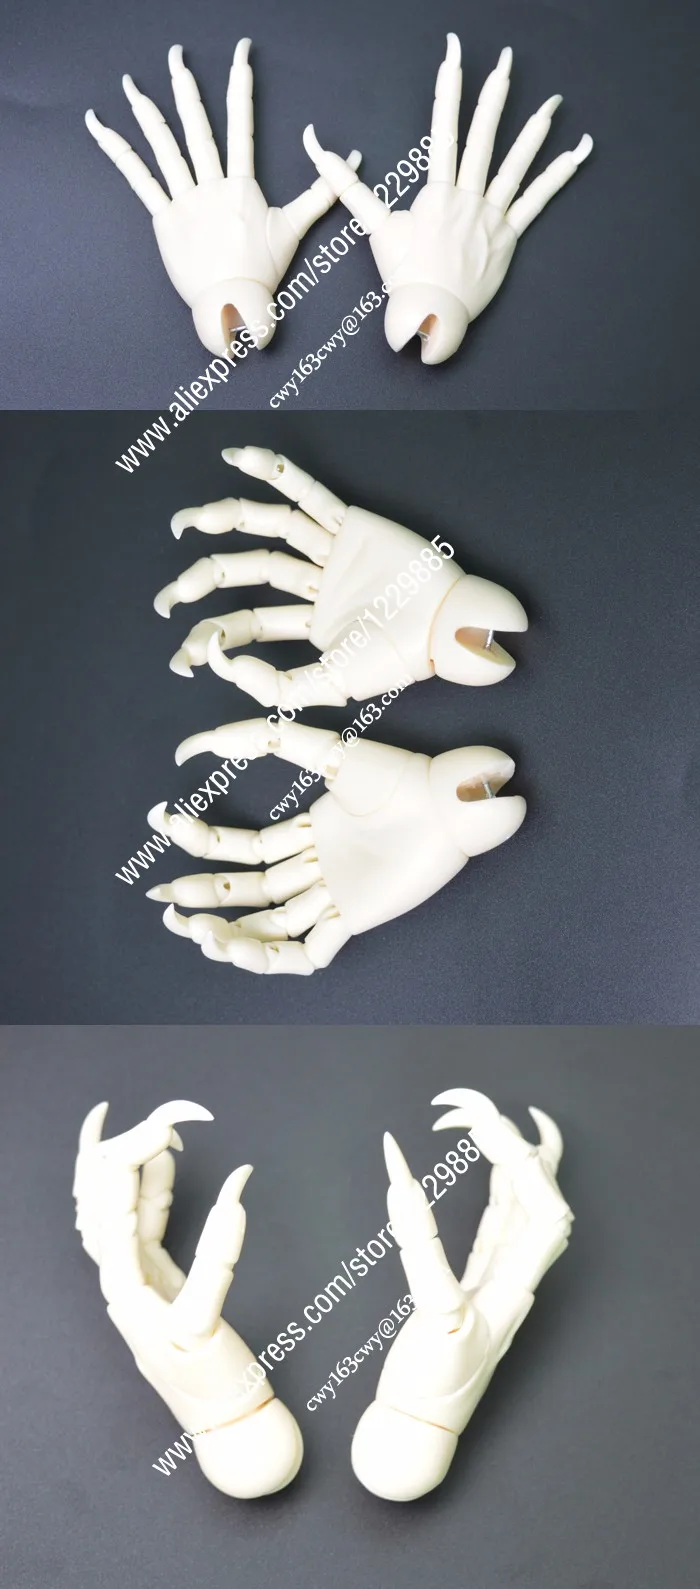 Pointy Fingernails BJD 1/3 Long nails Jointed Hands free shipping no makeup 